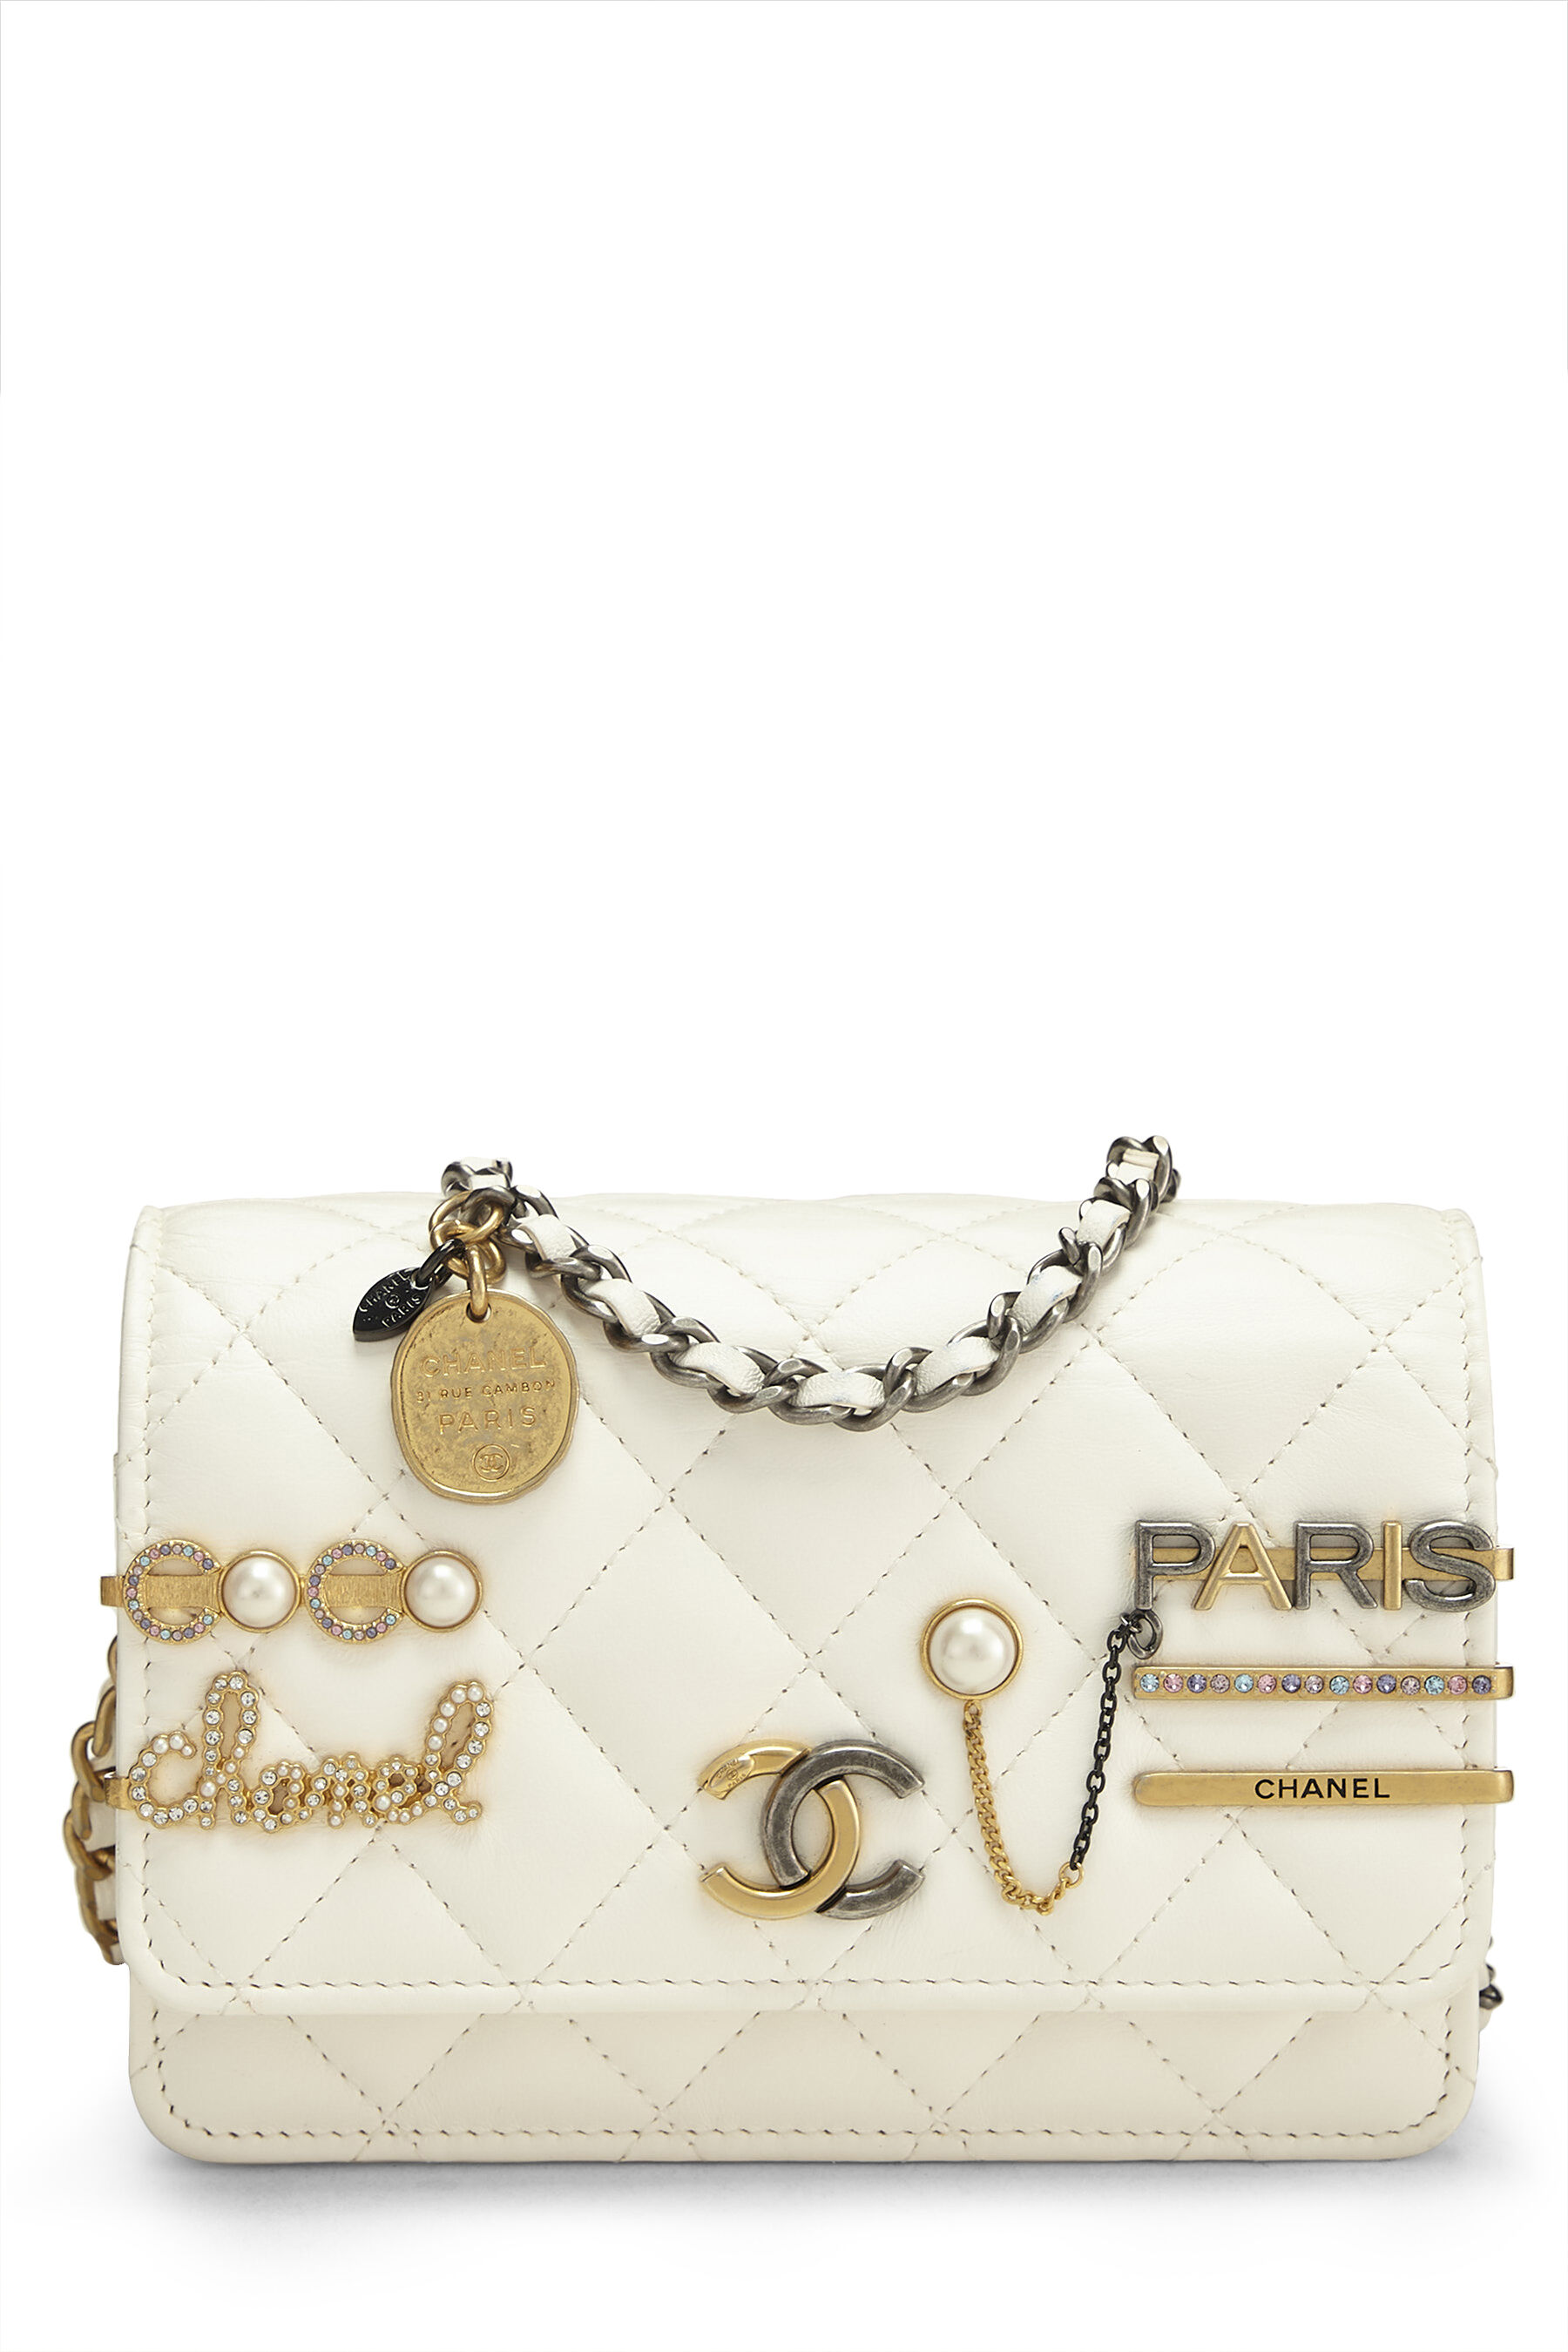 Chanel Paris-Dallas Metal Beauty Flap Bag Quilted Studded